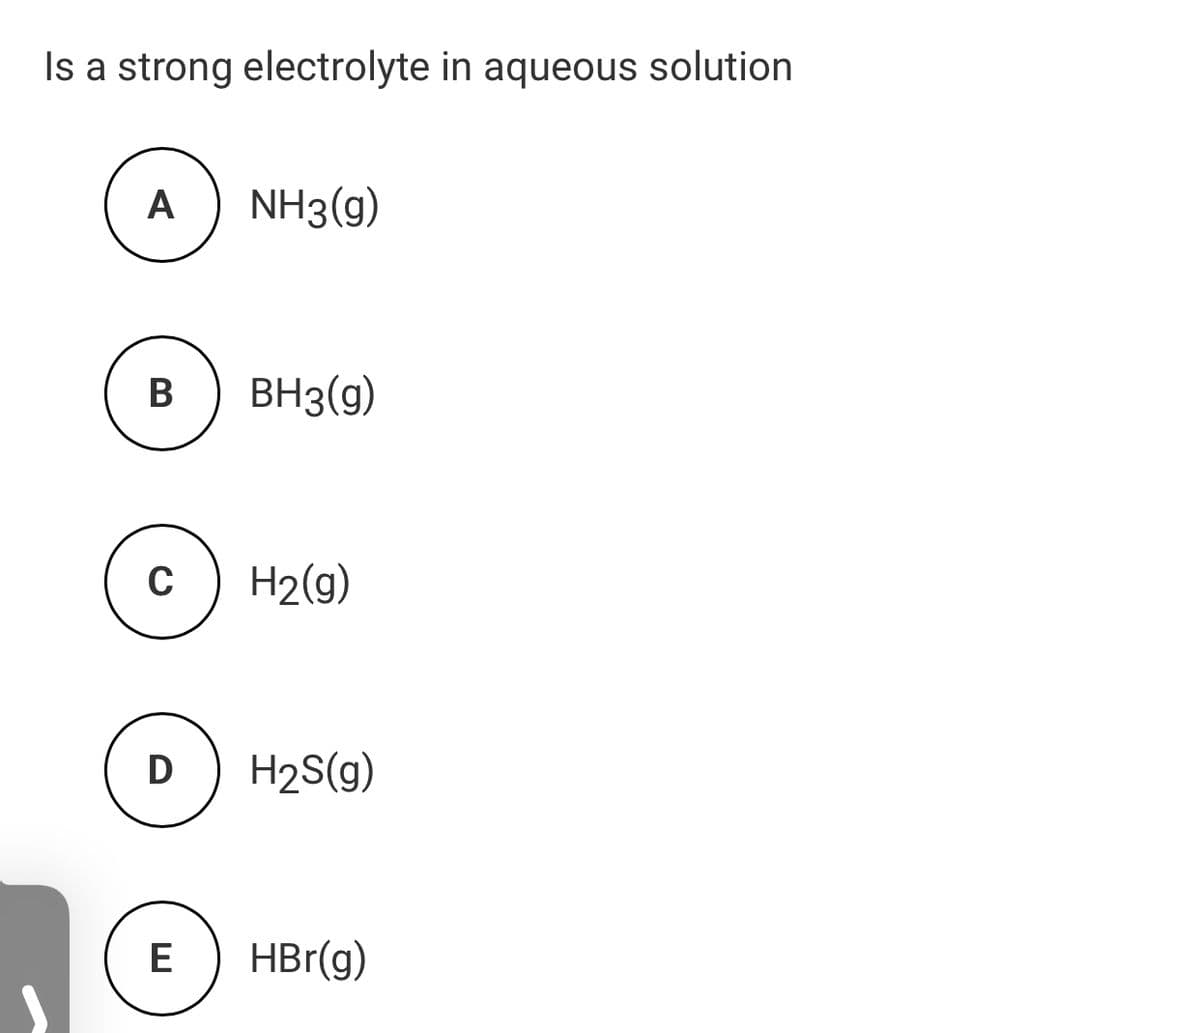 Is a strong electrolyte in aqueous solution
А
NH3(g)
В
BH3(g)
H2(9)
D
H2S(g)
E
HBr(g)
